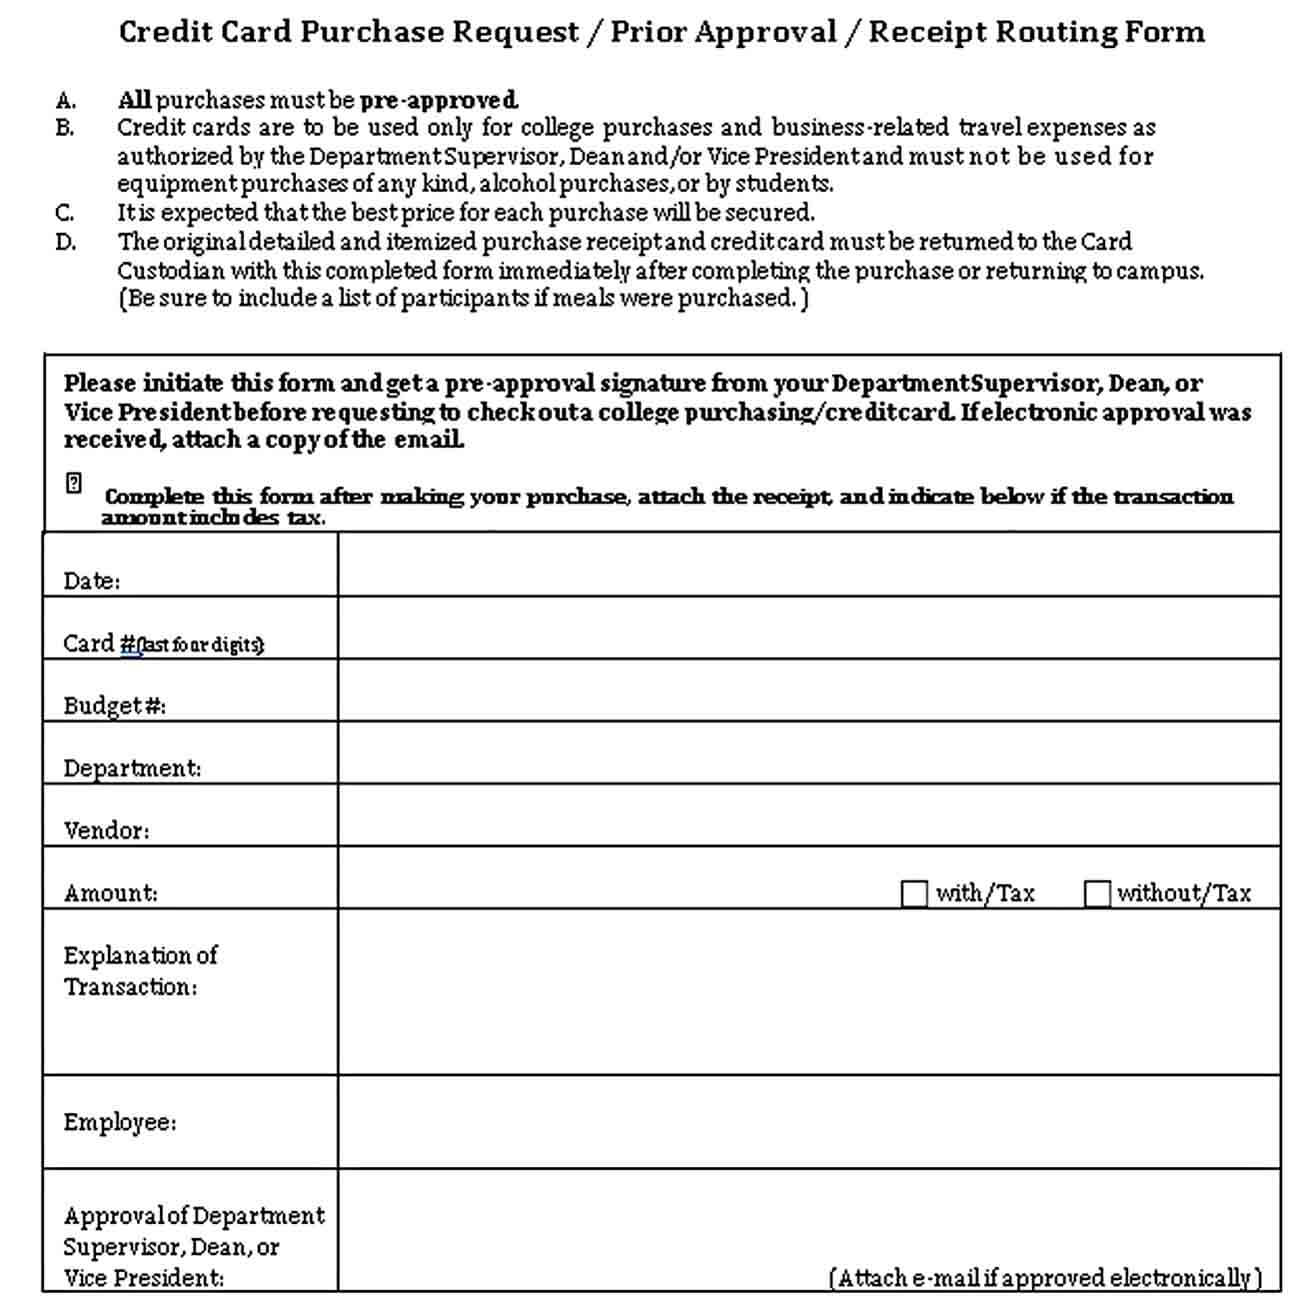 Credit Card Purchase Receipt Form